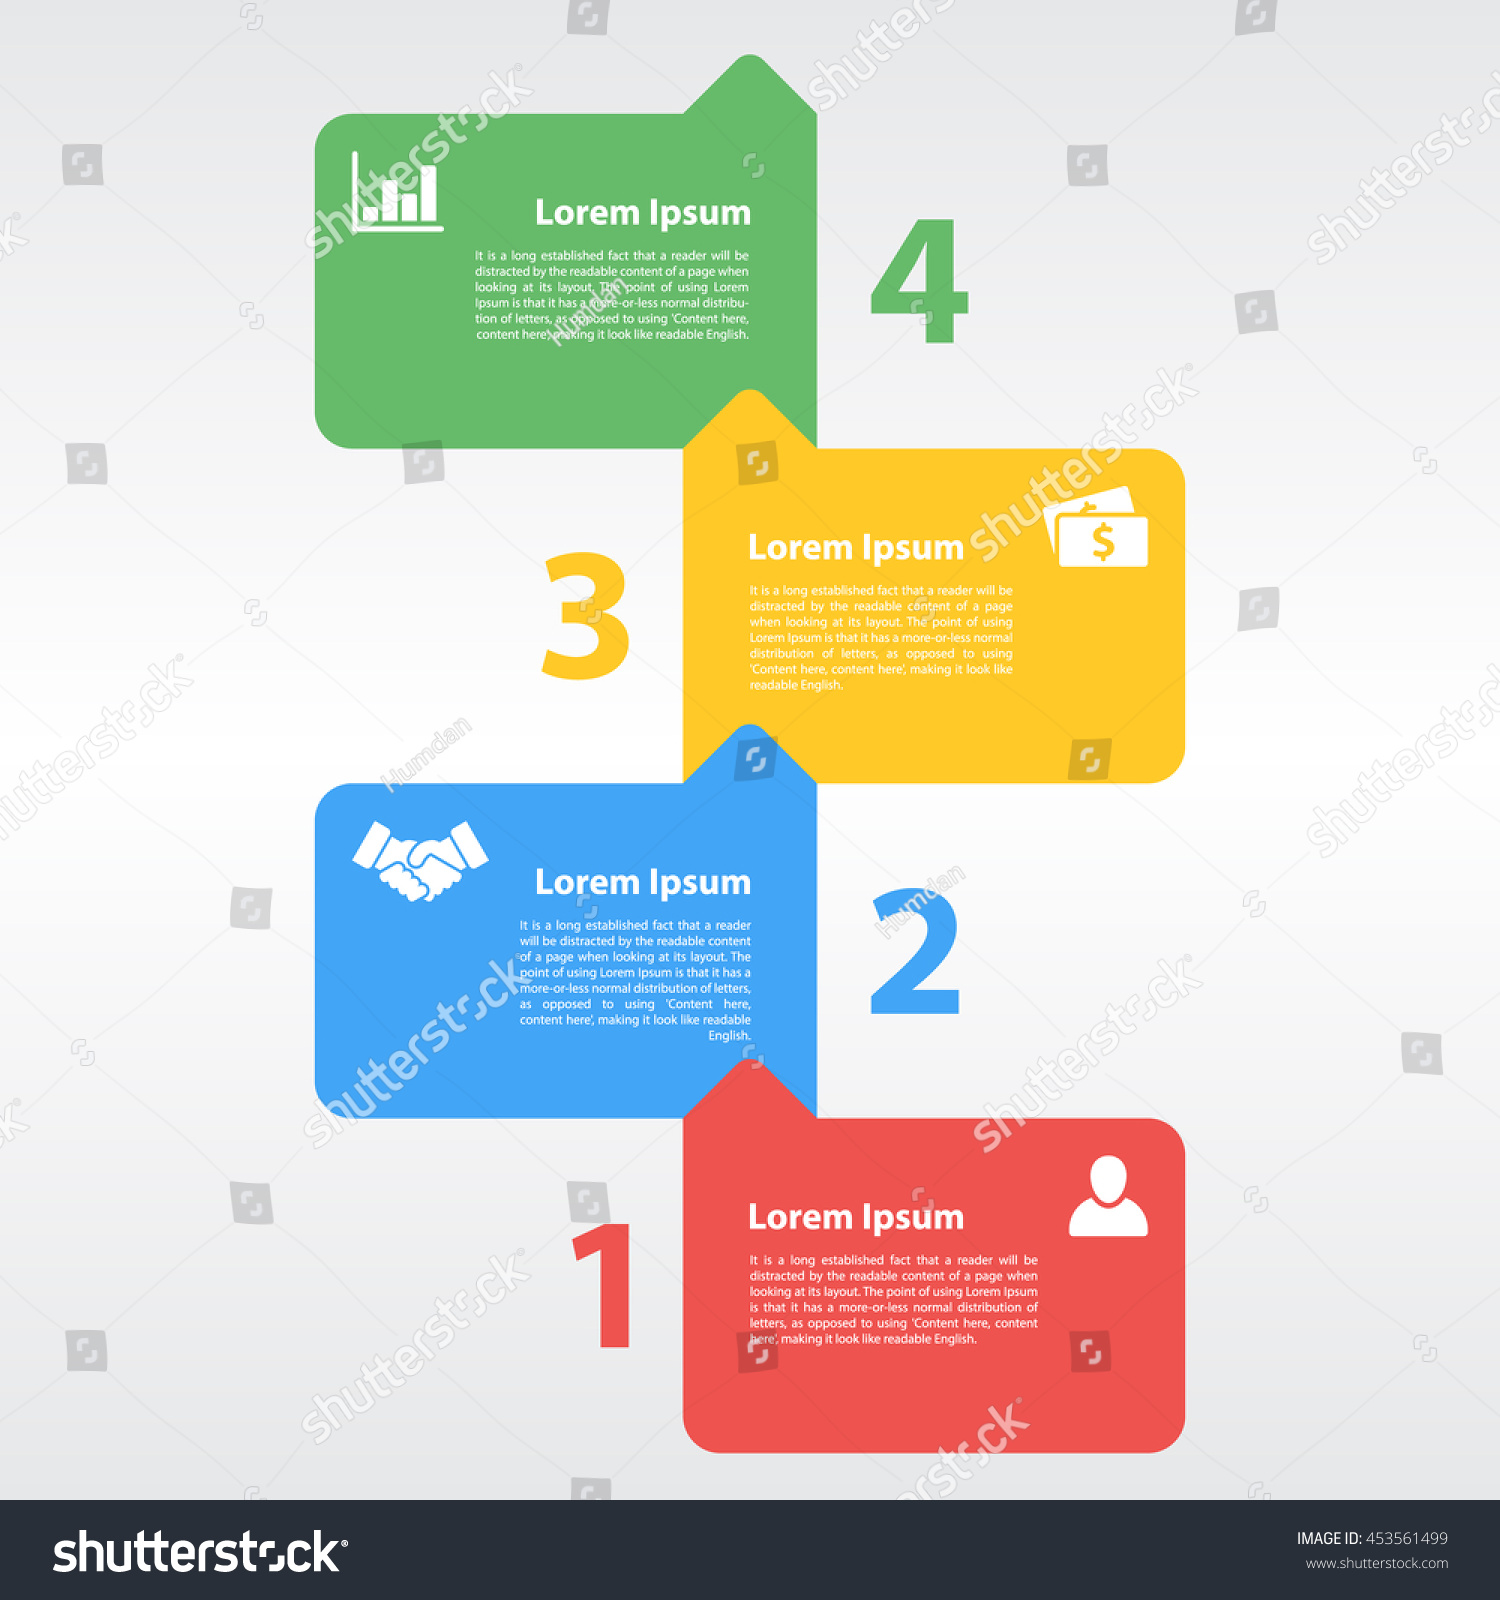 Four Steps Sequence Infographic Layout Concept Royalty Free Stock Vector 453561499 1390